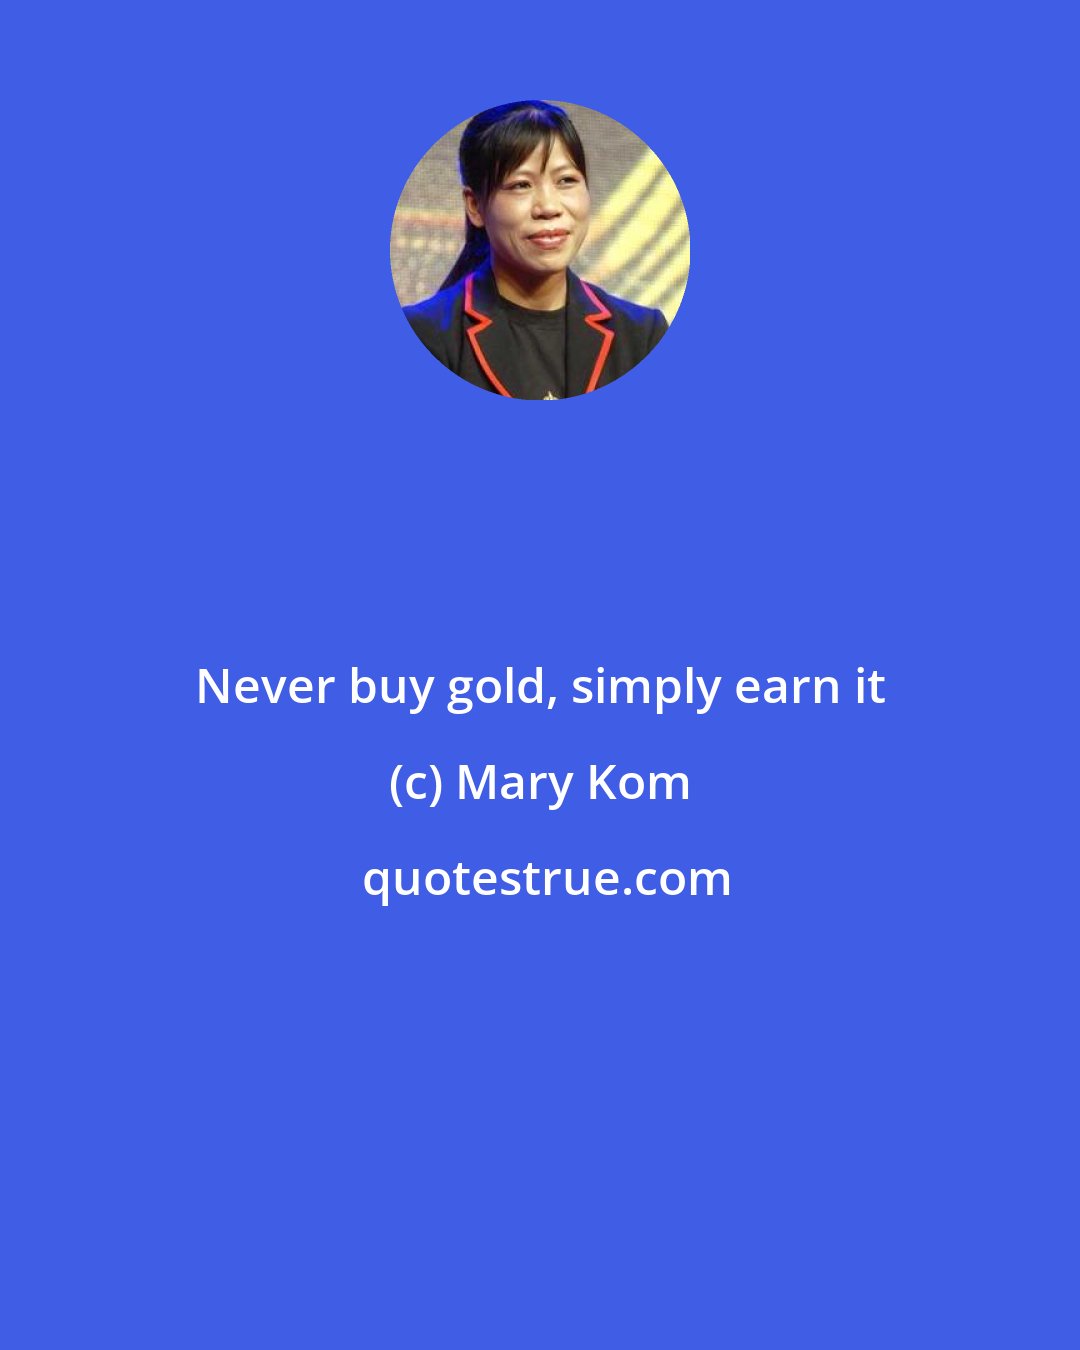 Mary Kom: Never buy gold, simply earn it